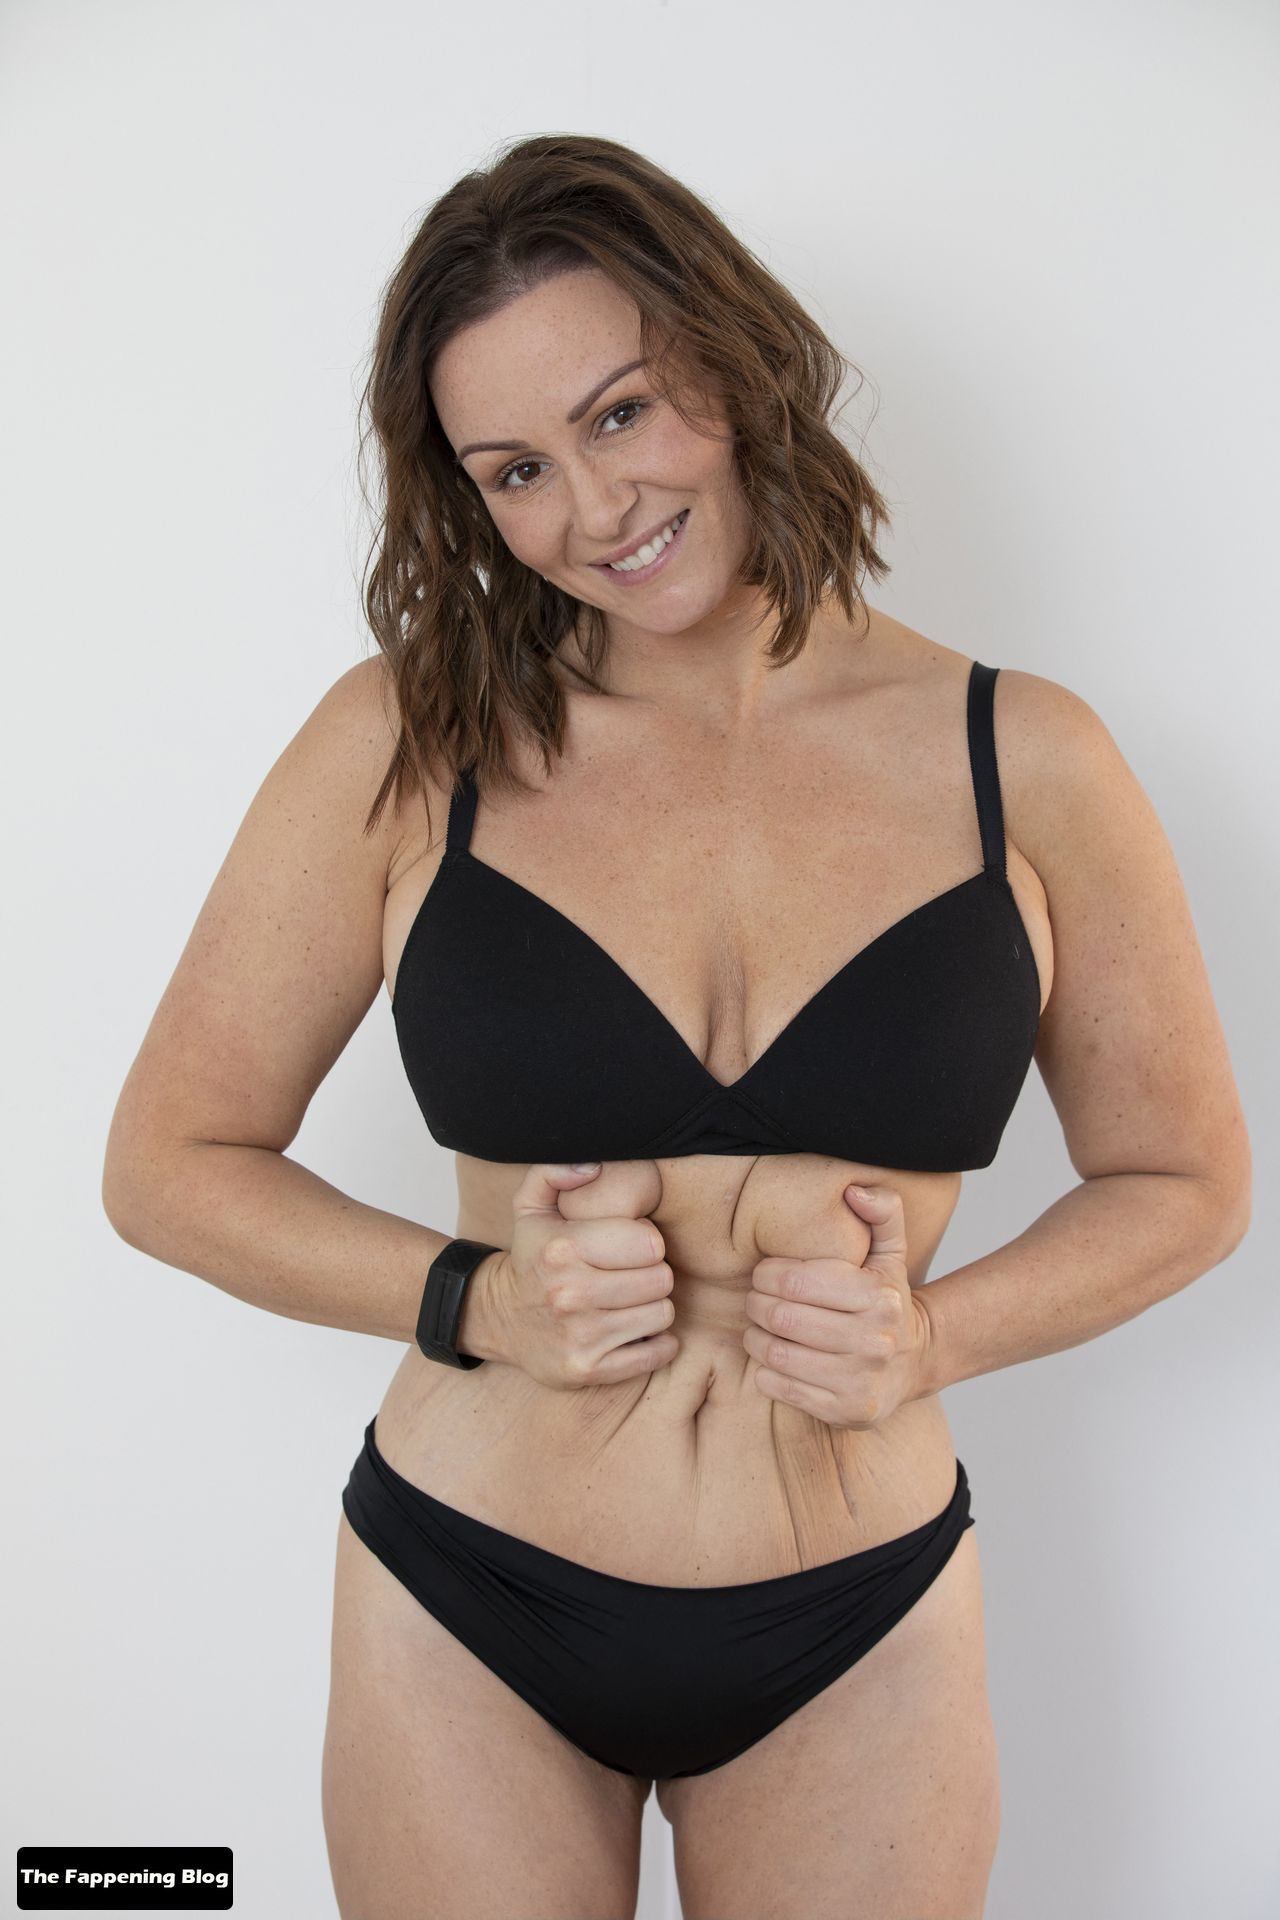 Chanelle-Hayes-Sexy-The-Fappening-Blog-4.jpg